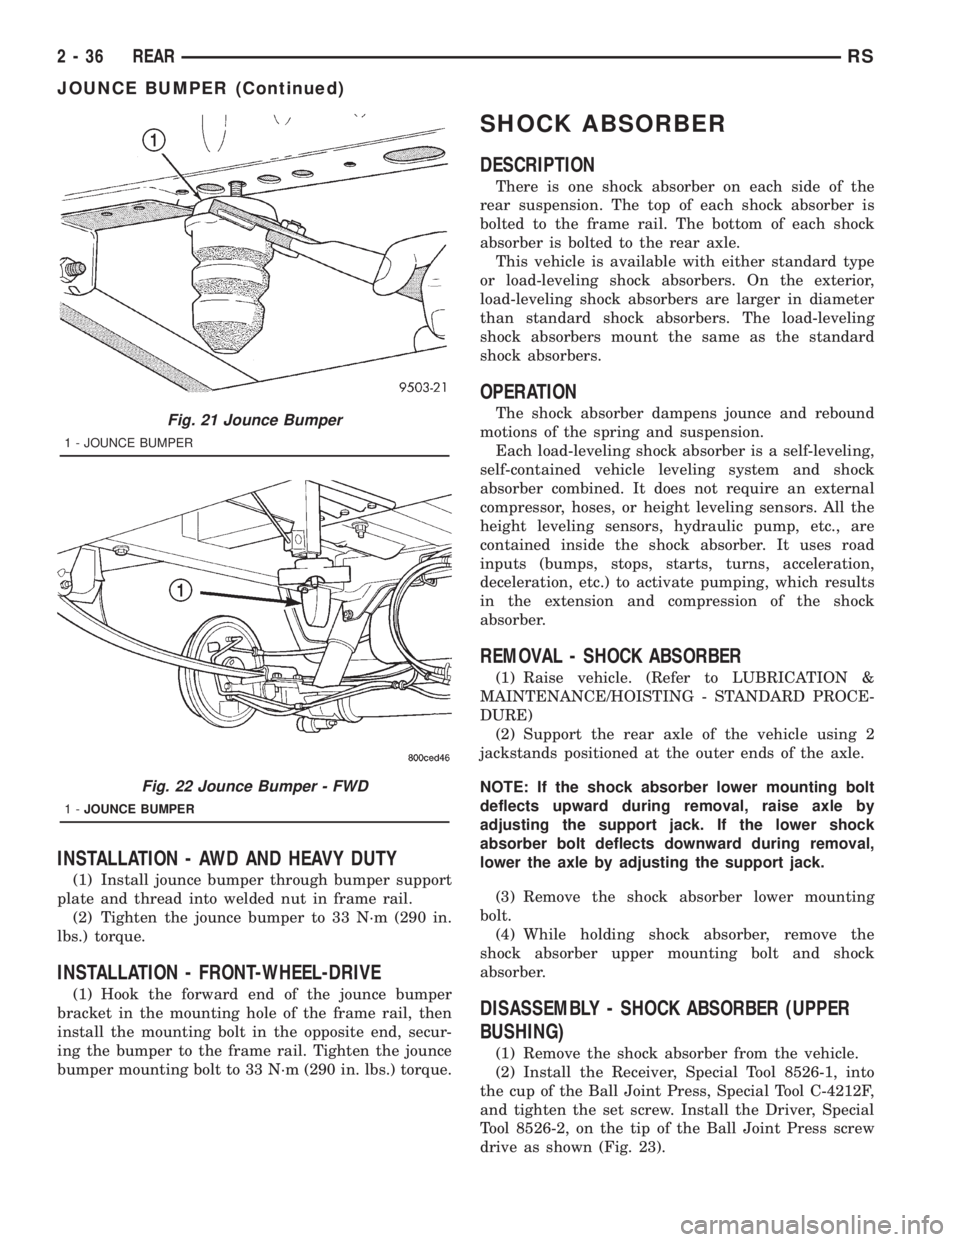 CHRYSLER VOYAGER 2001  Service Manual INSTALLATION - AWD AND HEAVY DUTY
(1) Install jounce bumper through bumper support
plate and thread into welded nut in frame rail.
(2) Tighten the jounce bumper to 33 N´m (290 in.
lbs.) torque.
INSTA